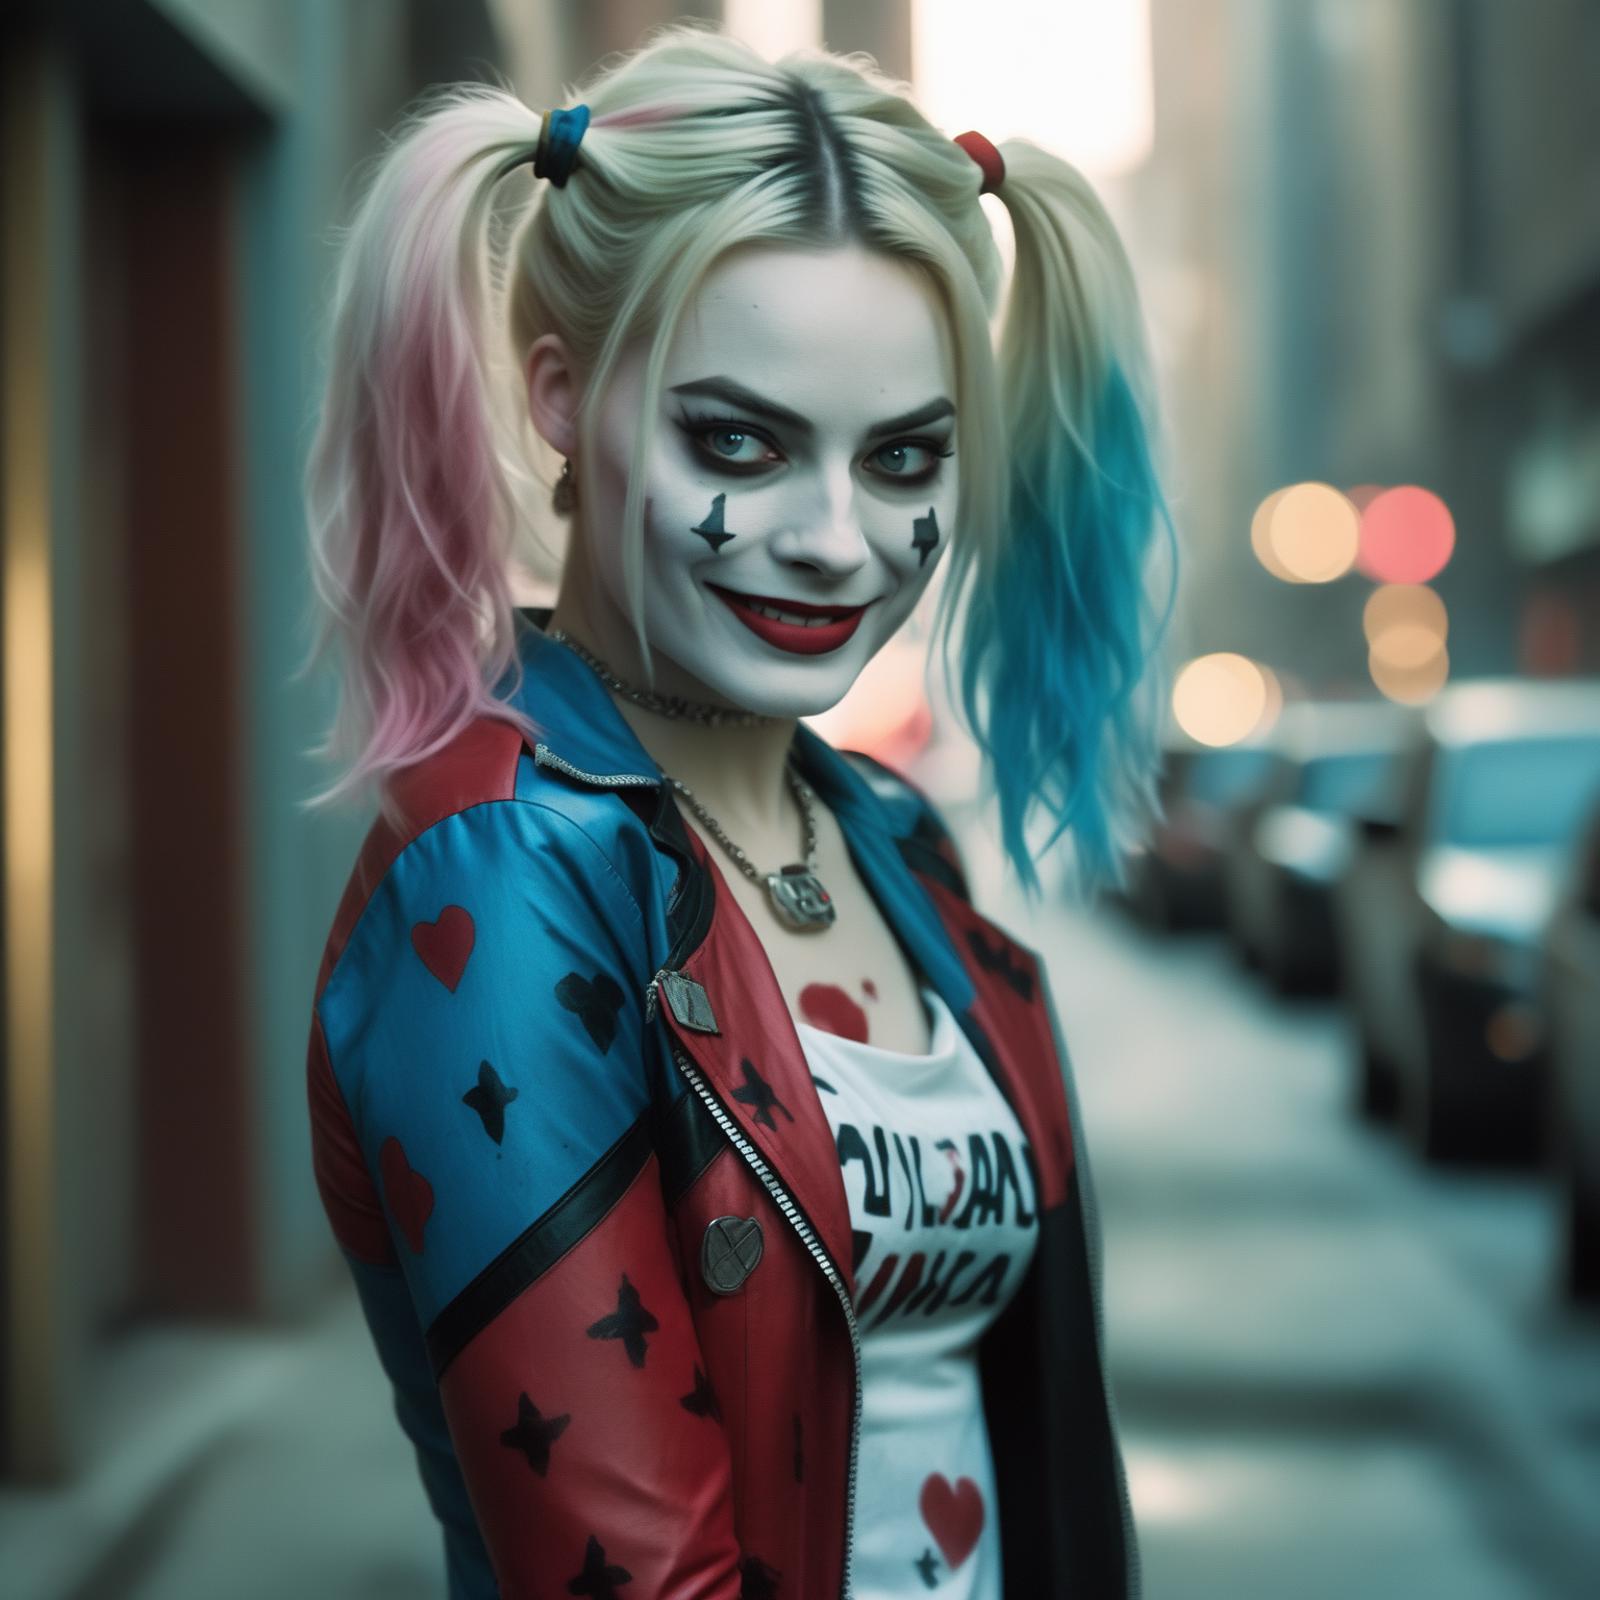 A woman with pink hair and a Harley Quinn costume standing on the sidewalk.